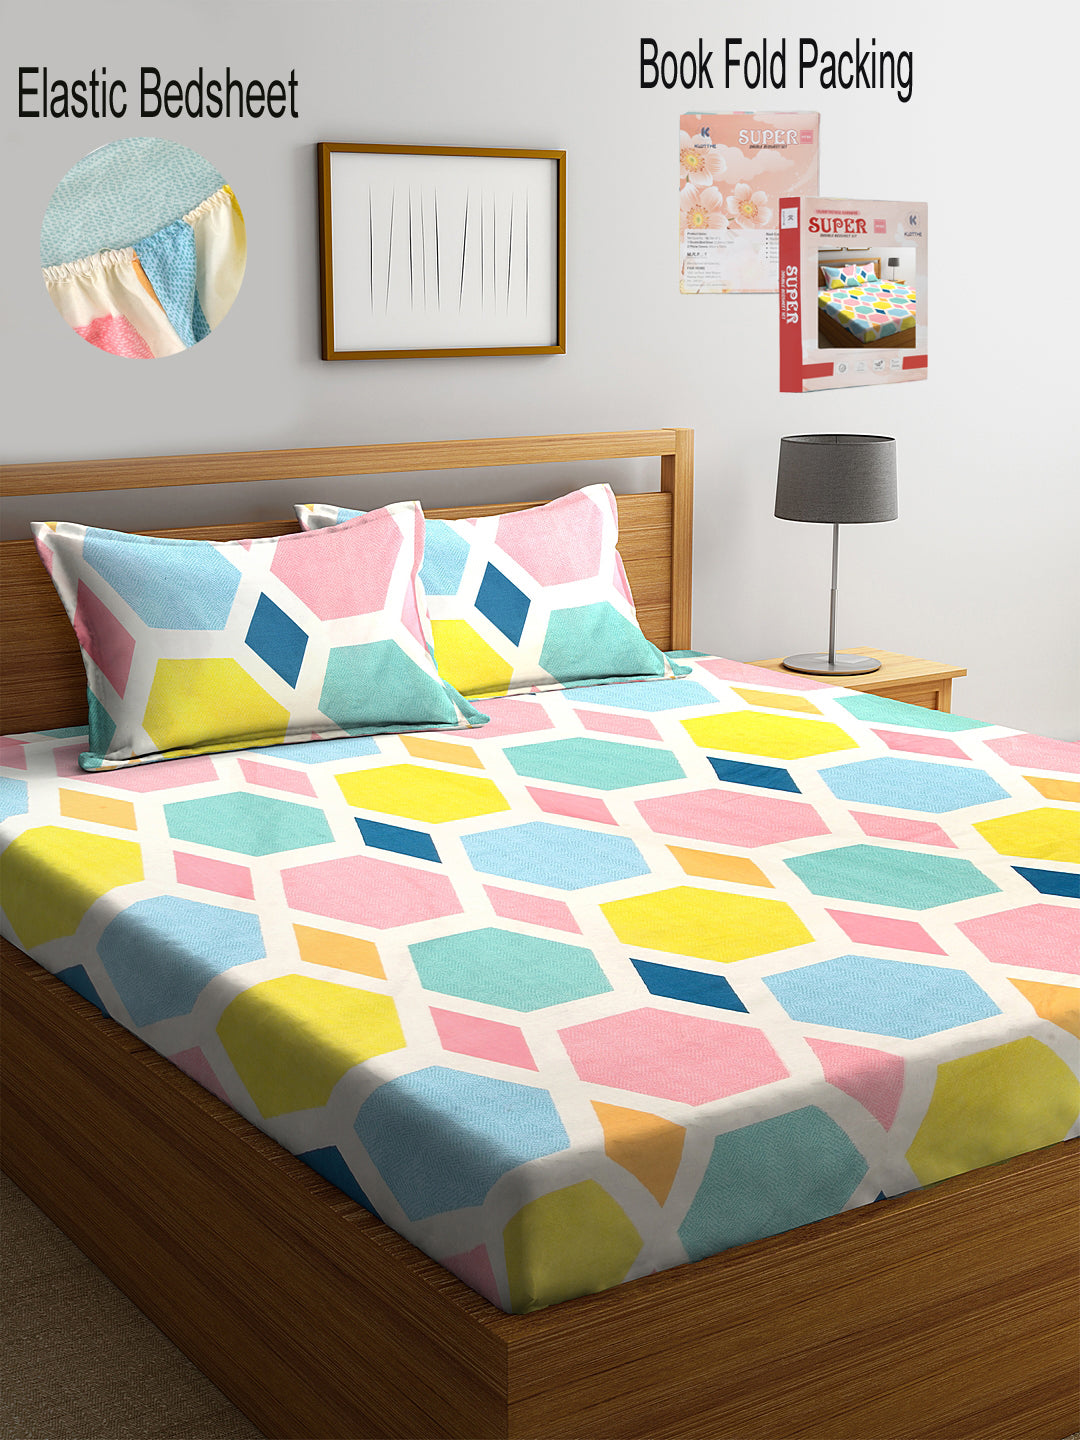 Klotthe Multi Geometric 300 TC Cotton Blend Elasticated Double Bedsheet with 2 Pillow Cover in Book Fold Pack